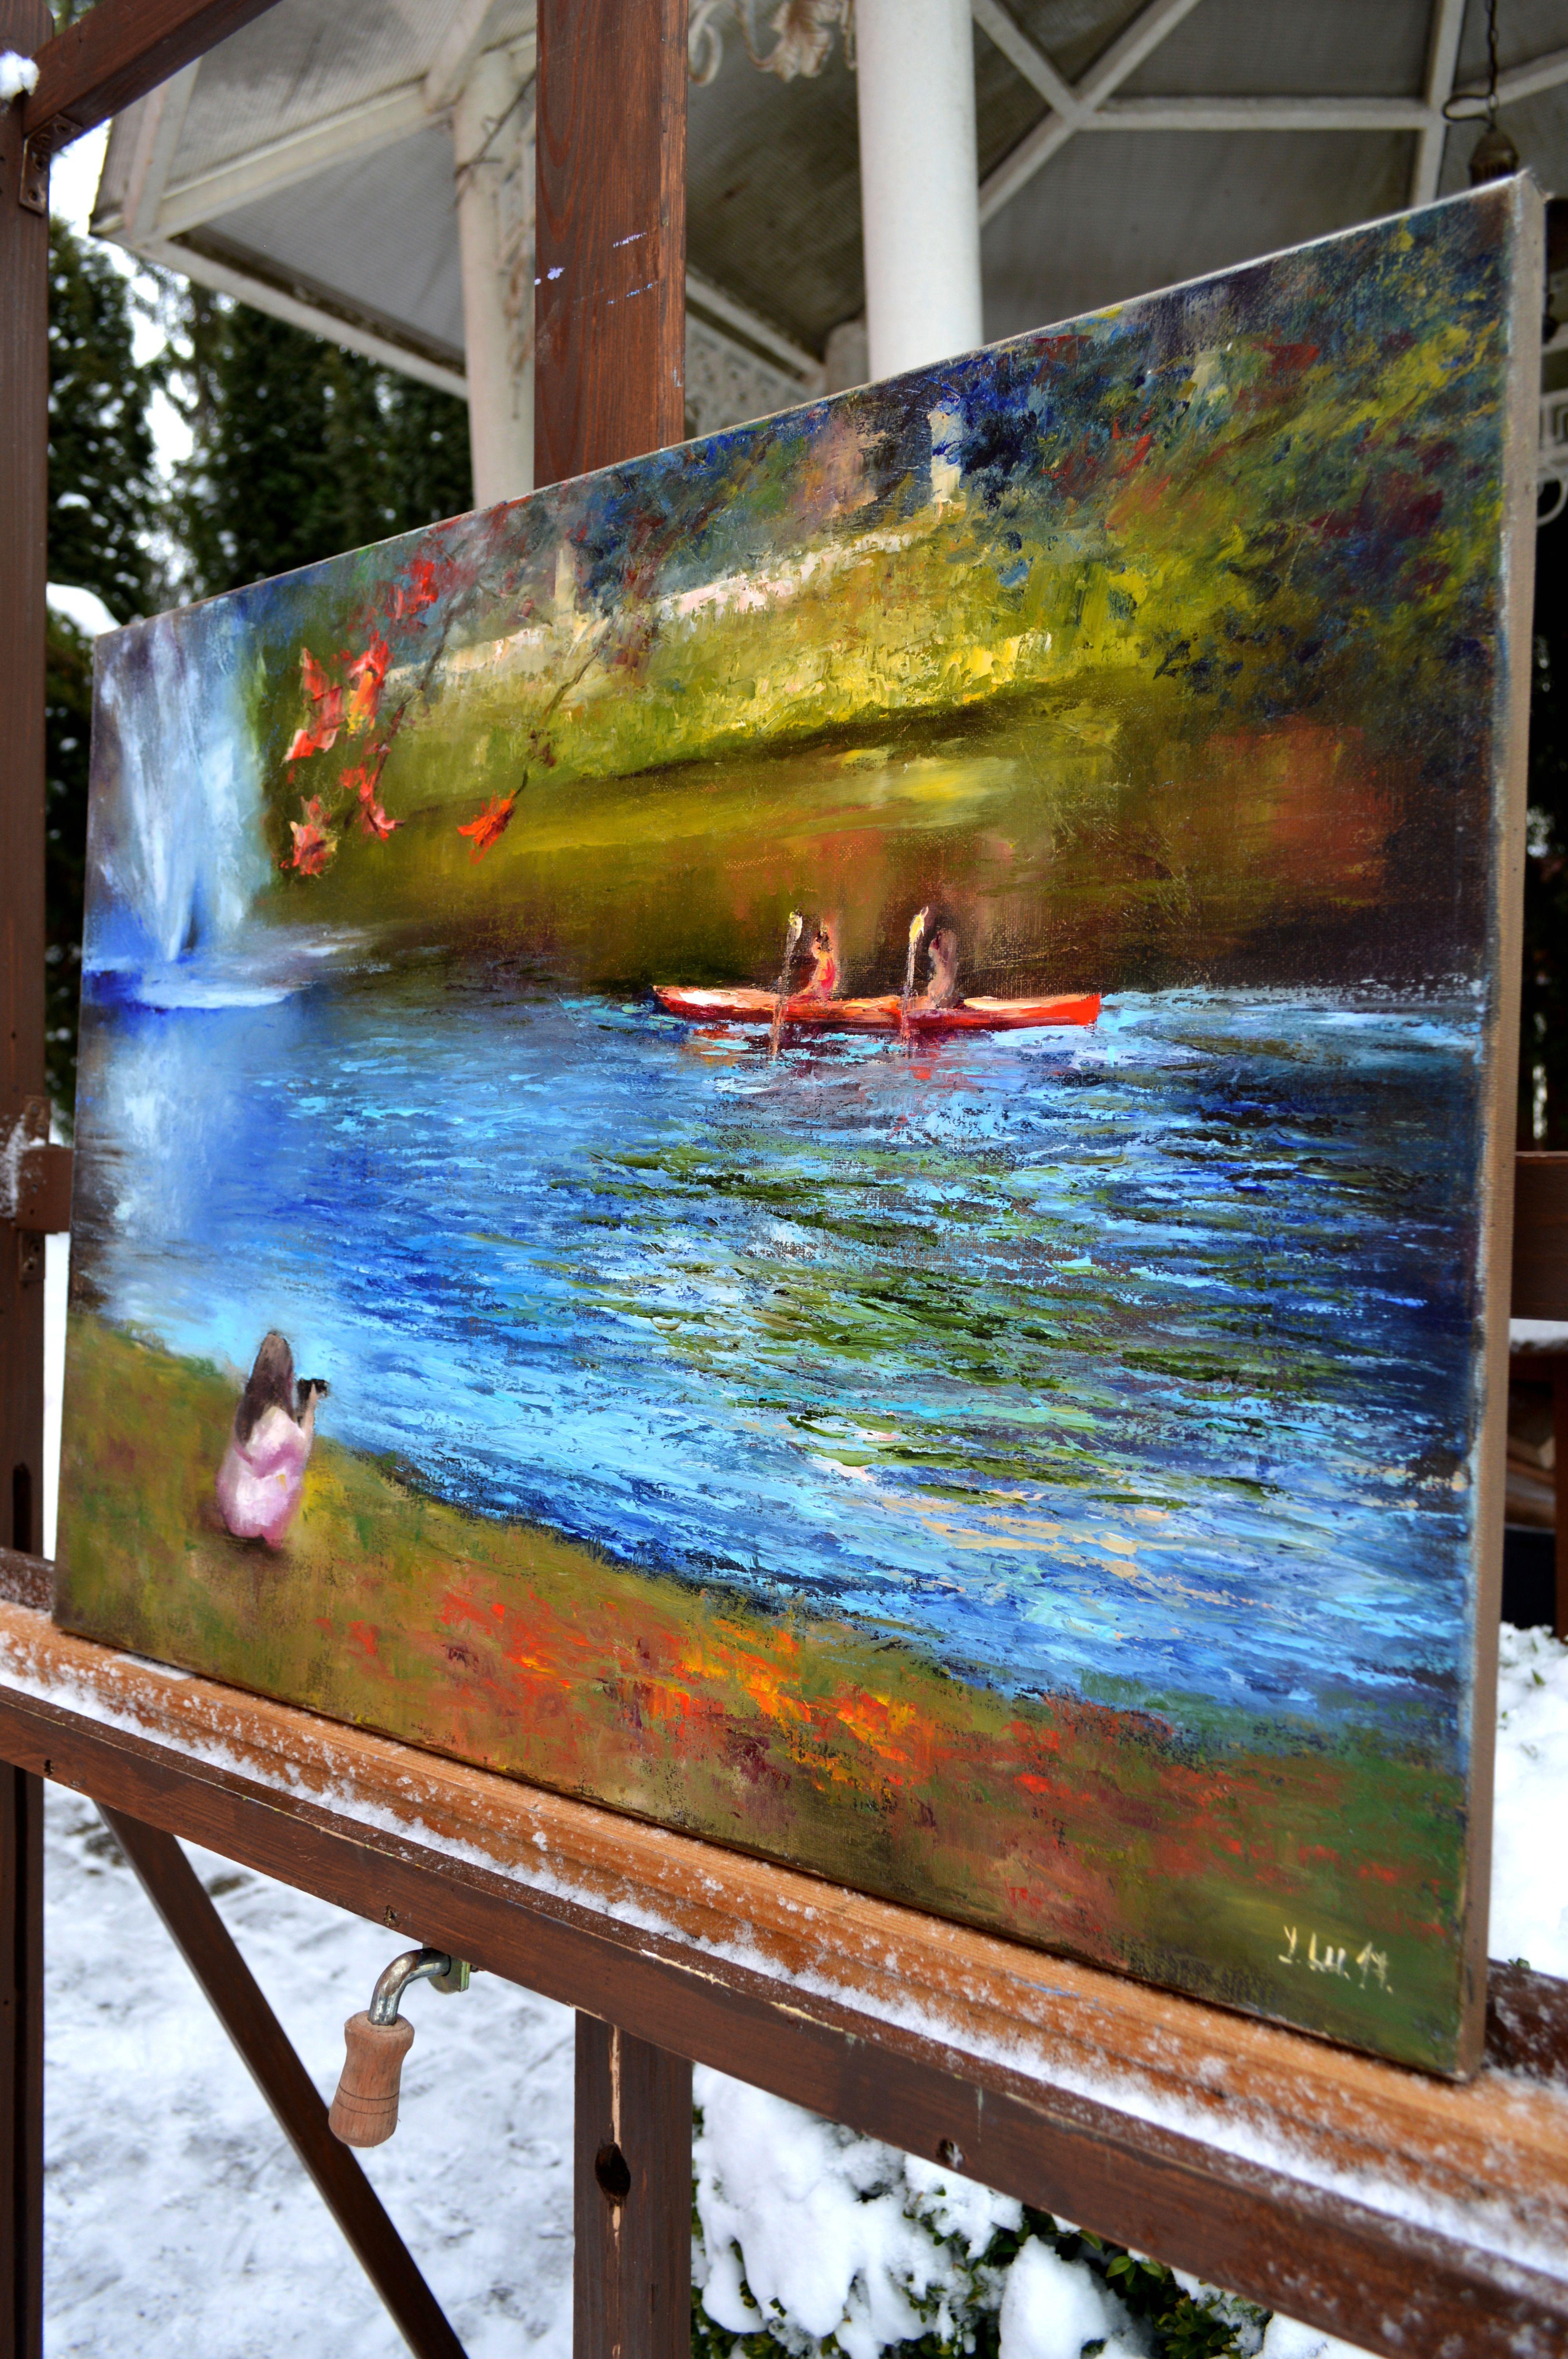 River fountain in a city park - Expressionist Painting by Elena Lukina